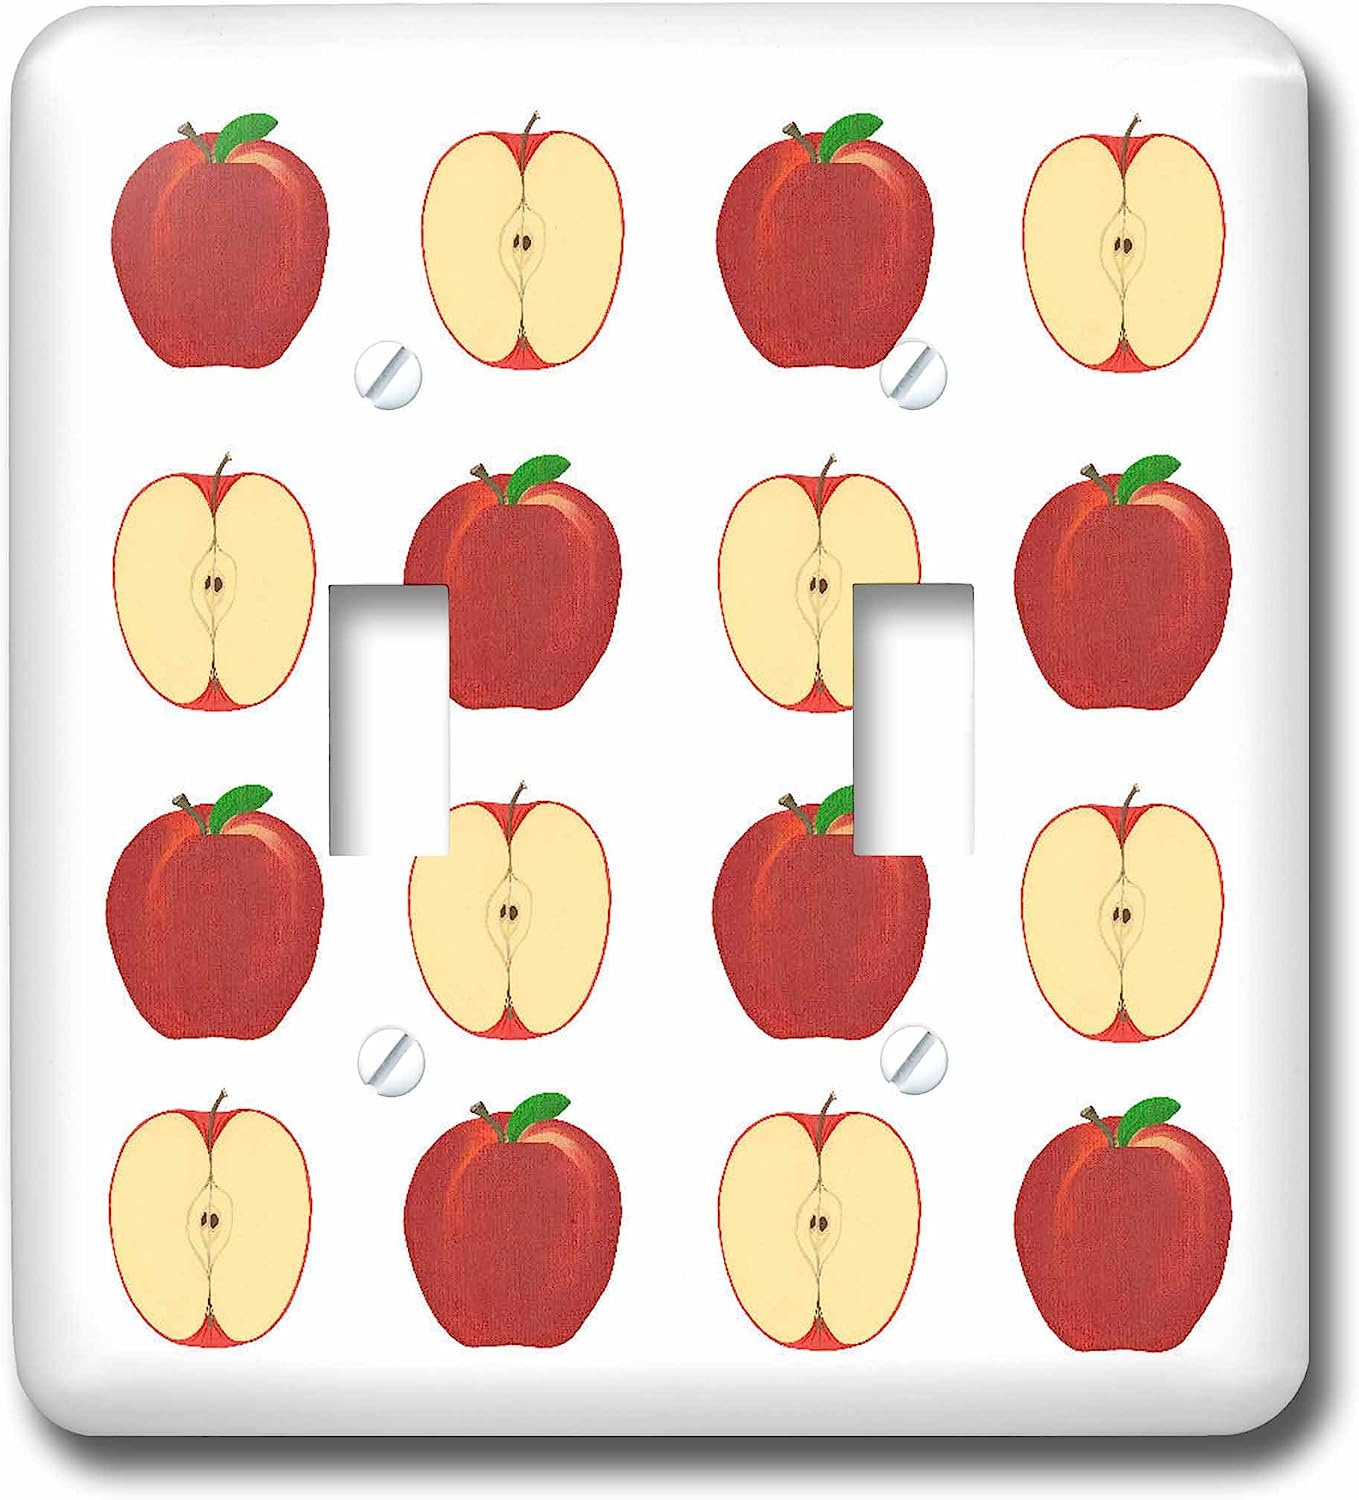 Double Toggle Switch with Red Apple Slice Painting